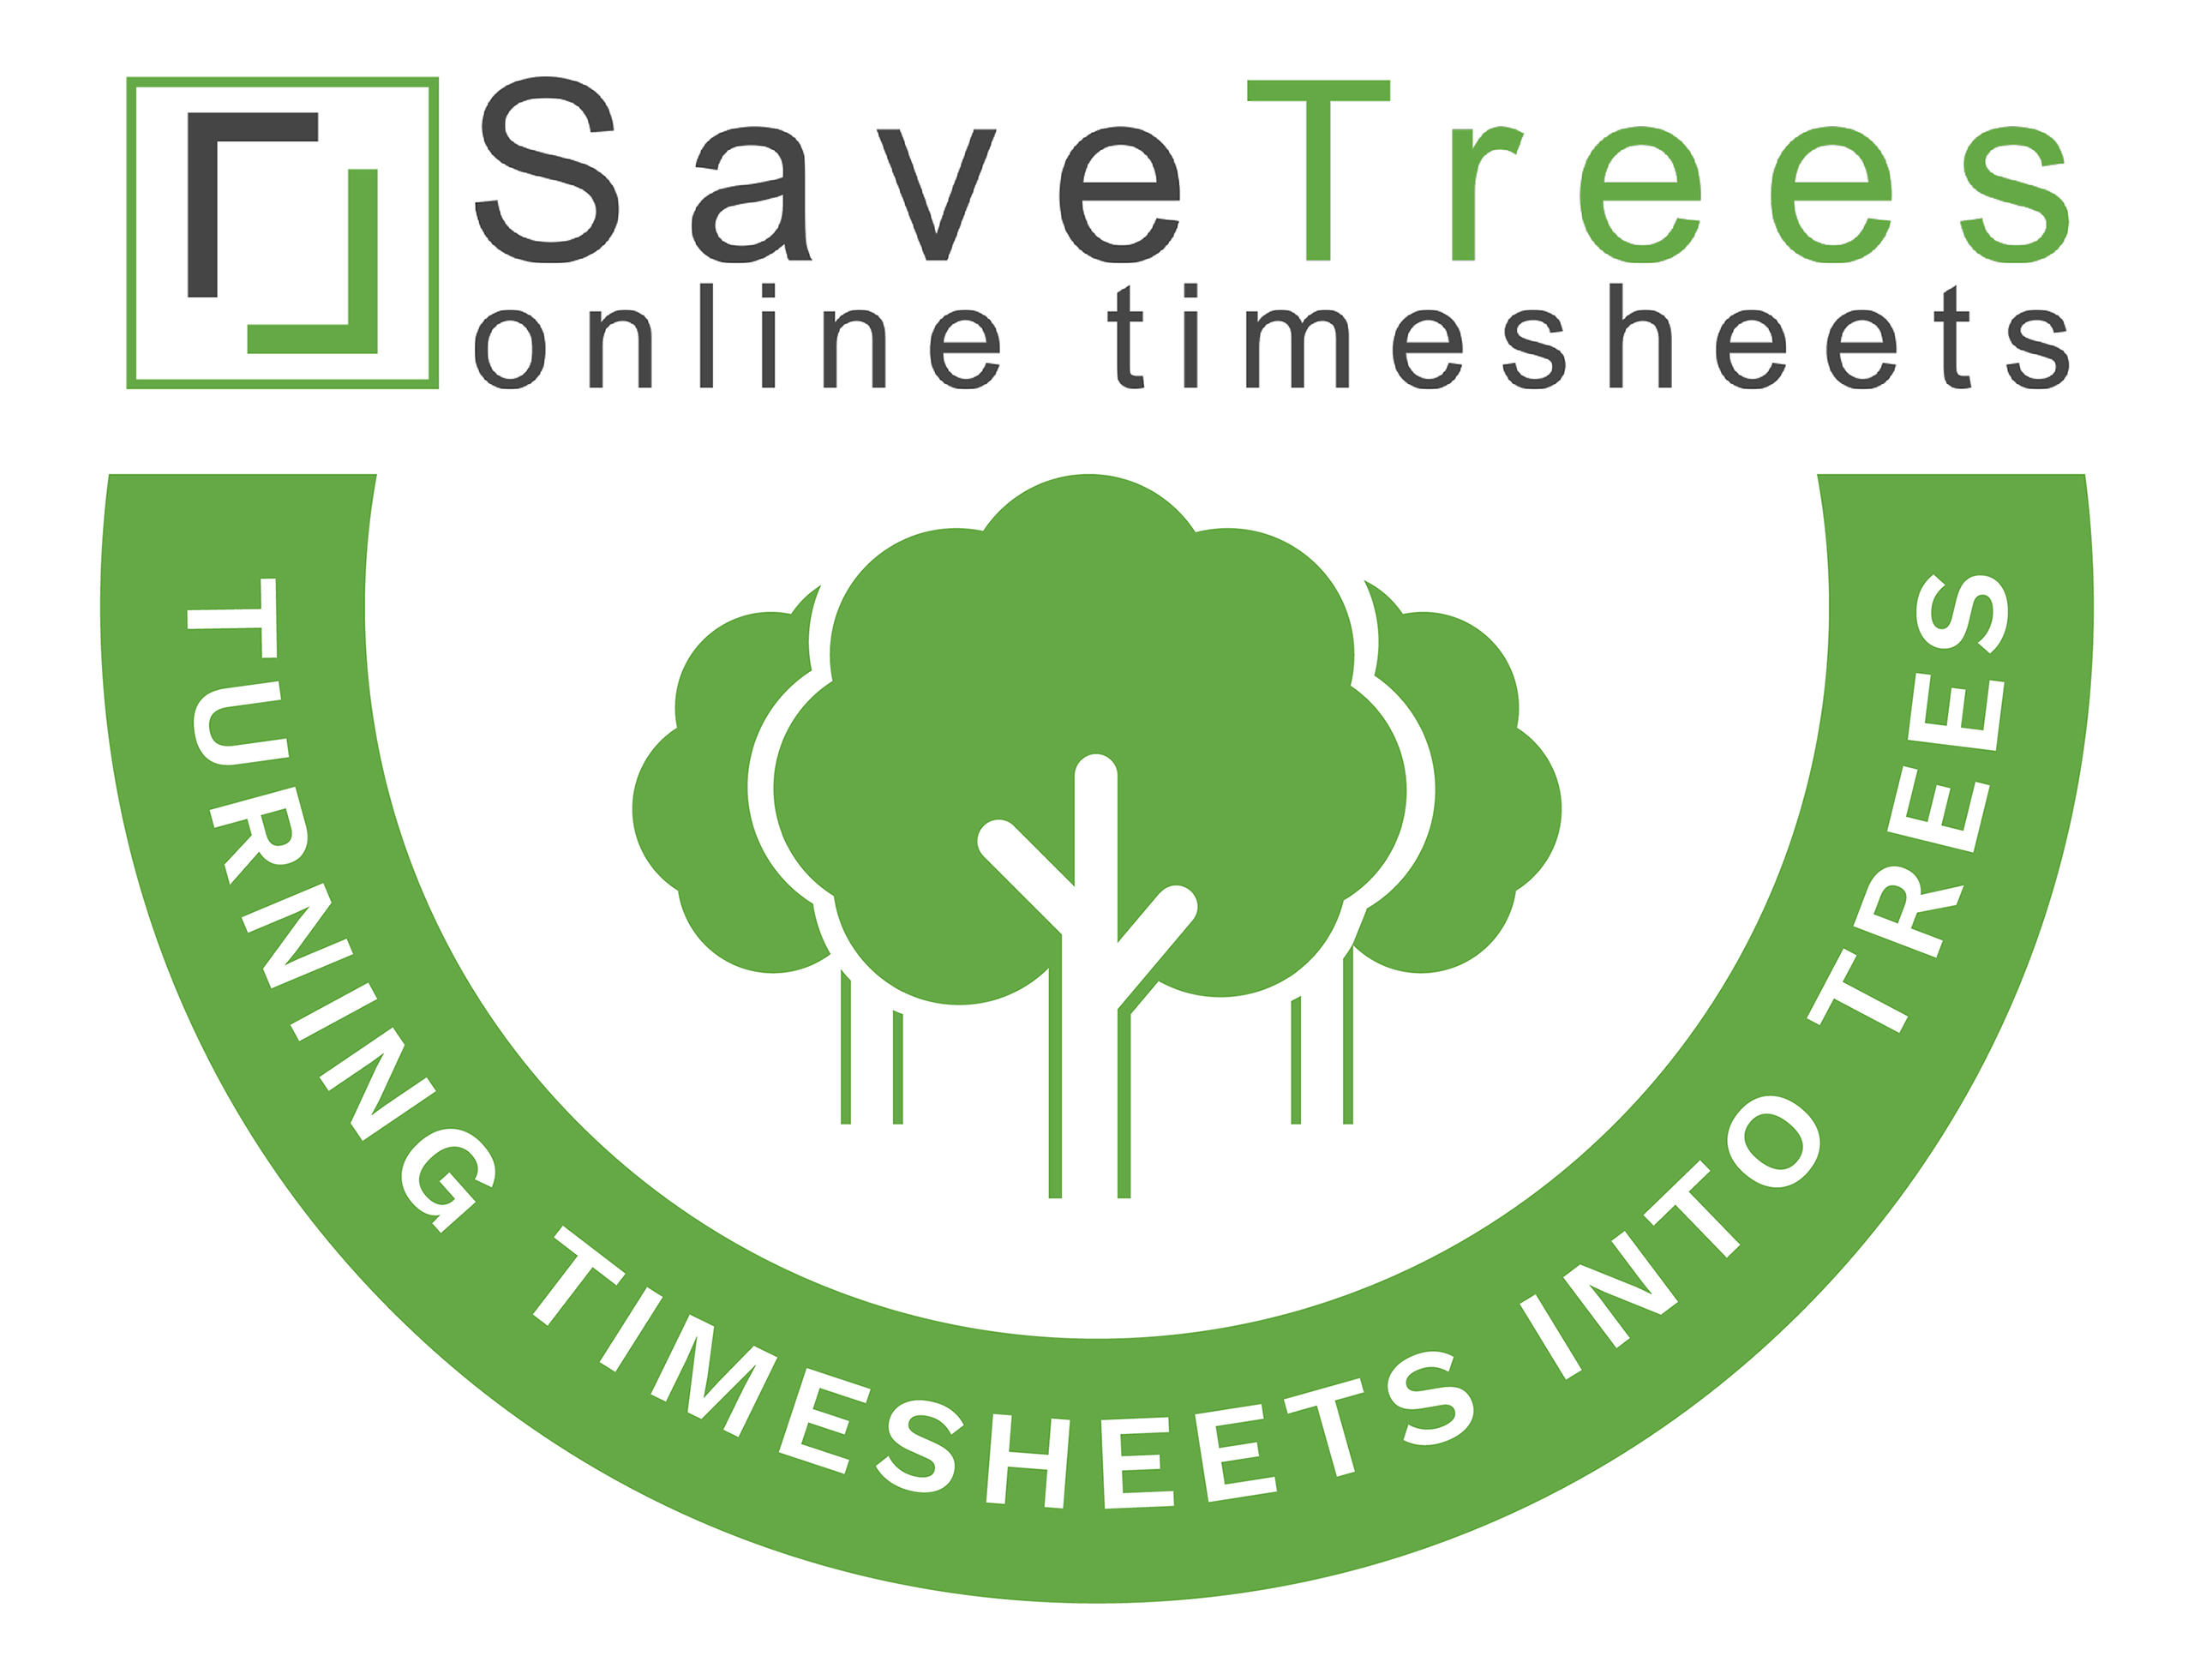 Turning timesheets into trees with SaveTrees